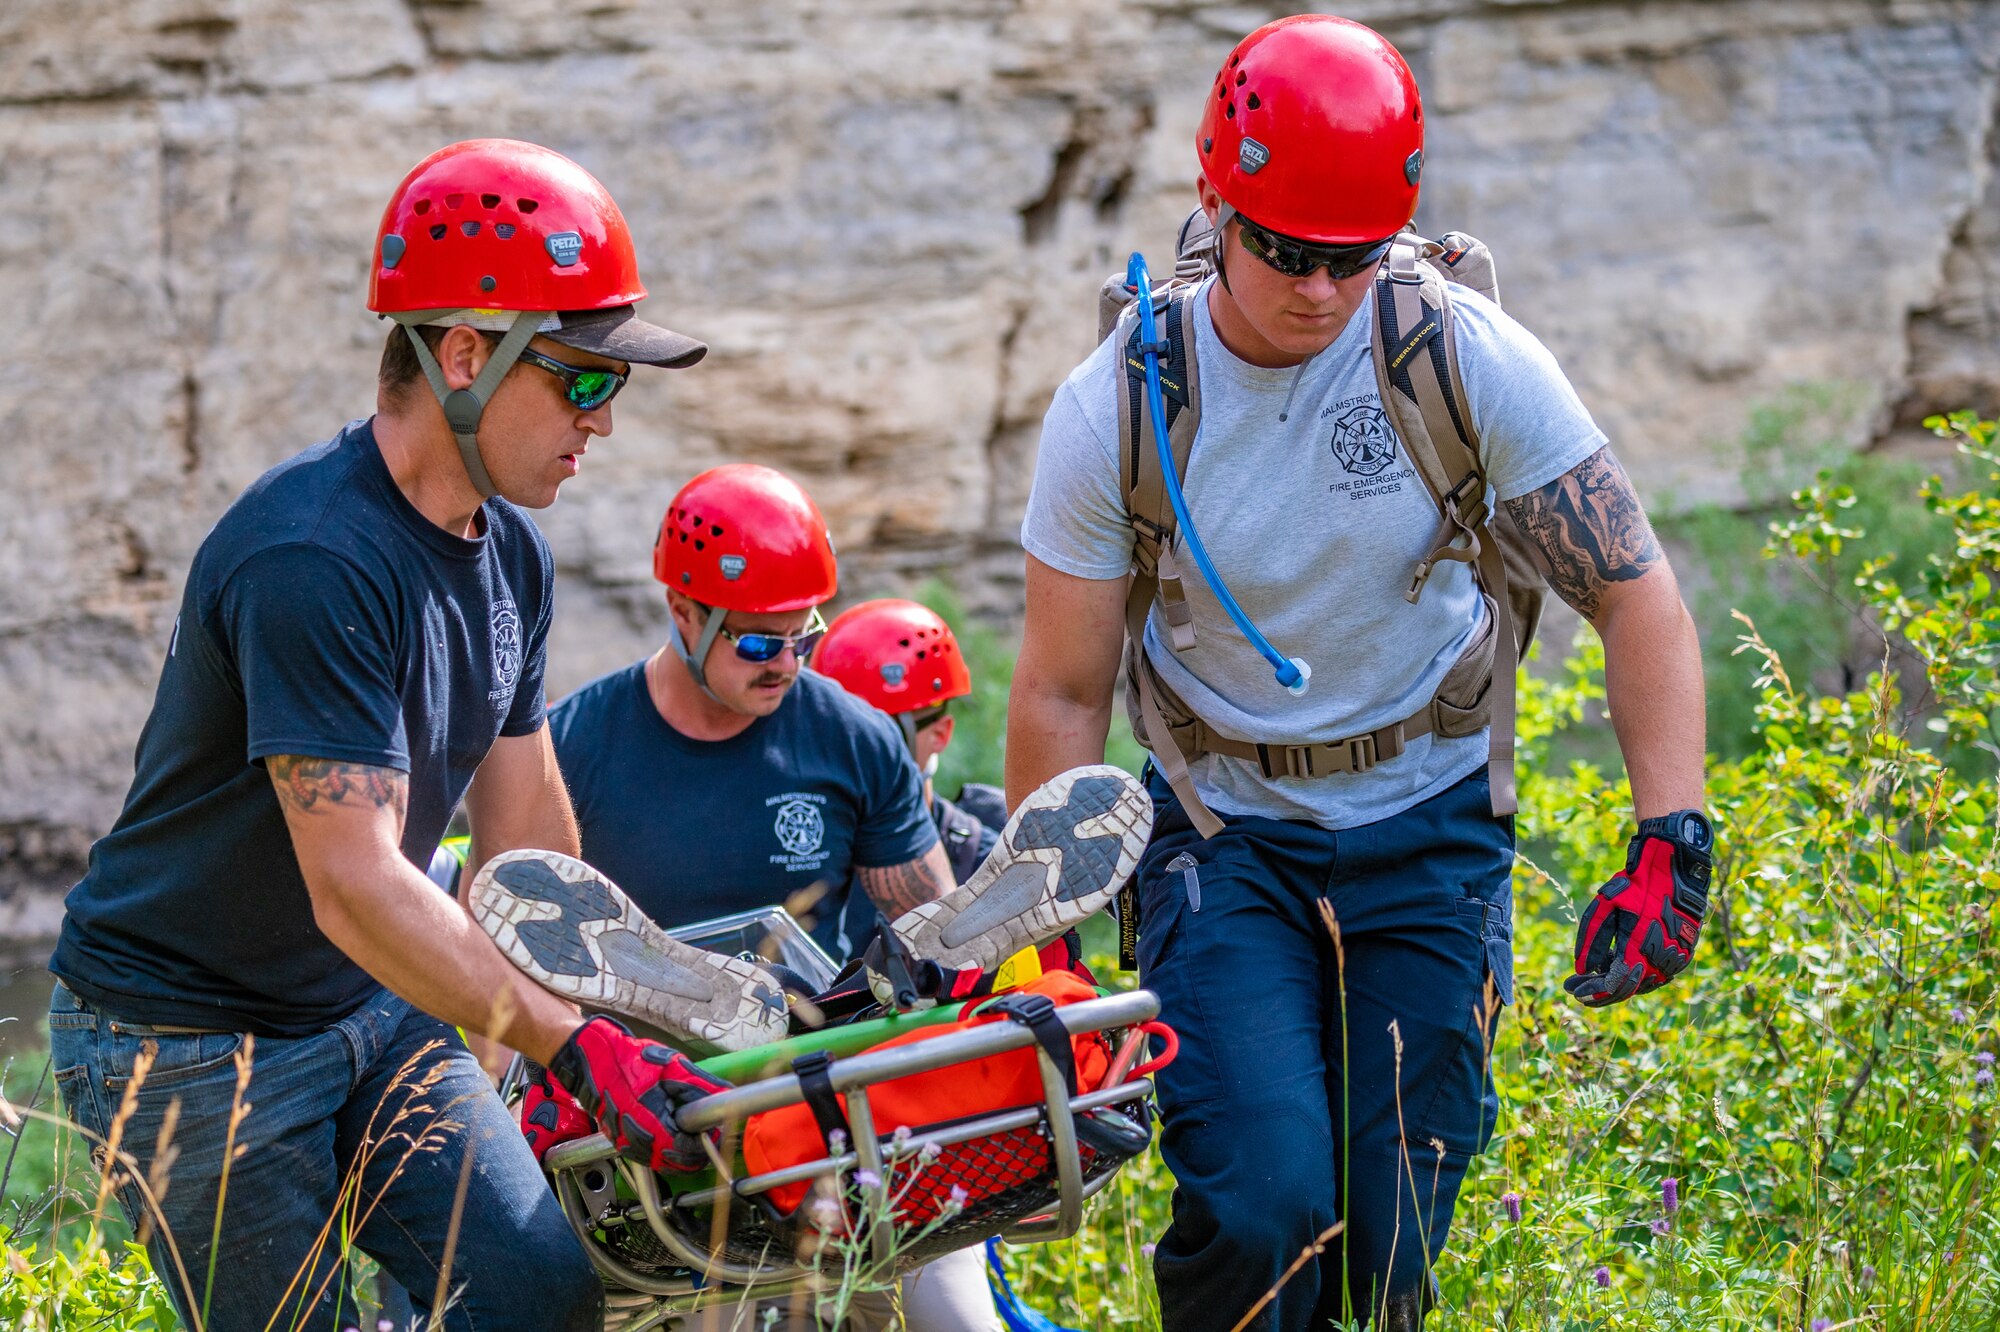 Members of the 341st Civil Engineer Fire Department transport Senior Airman Rocky Lane, 341st Civil Engineer Squadron heavy equipment operator, to the helicopter pick-up site during a search and rescue exercise August 3, 2022, in Sluice Boxes State Park.